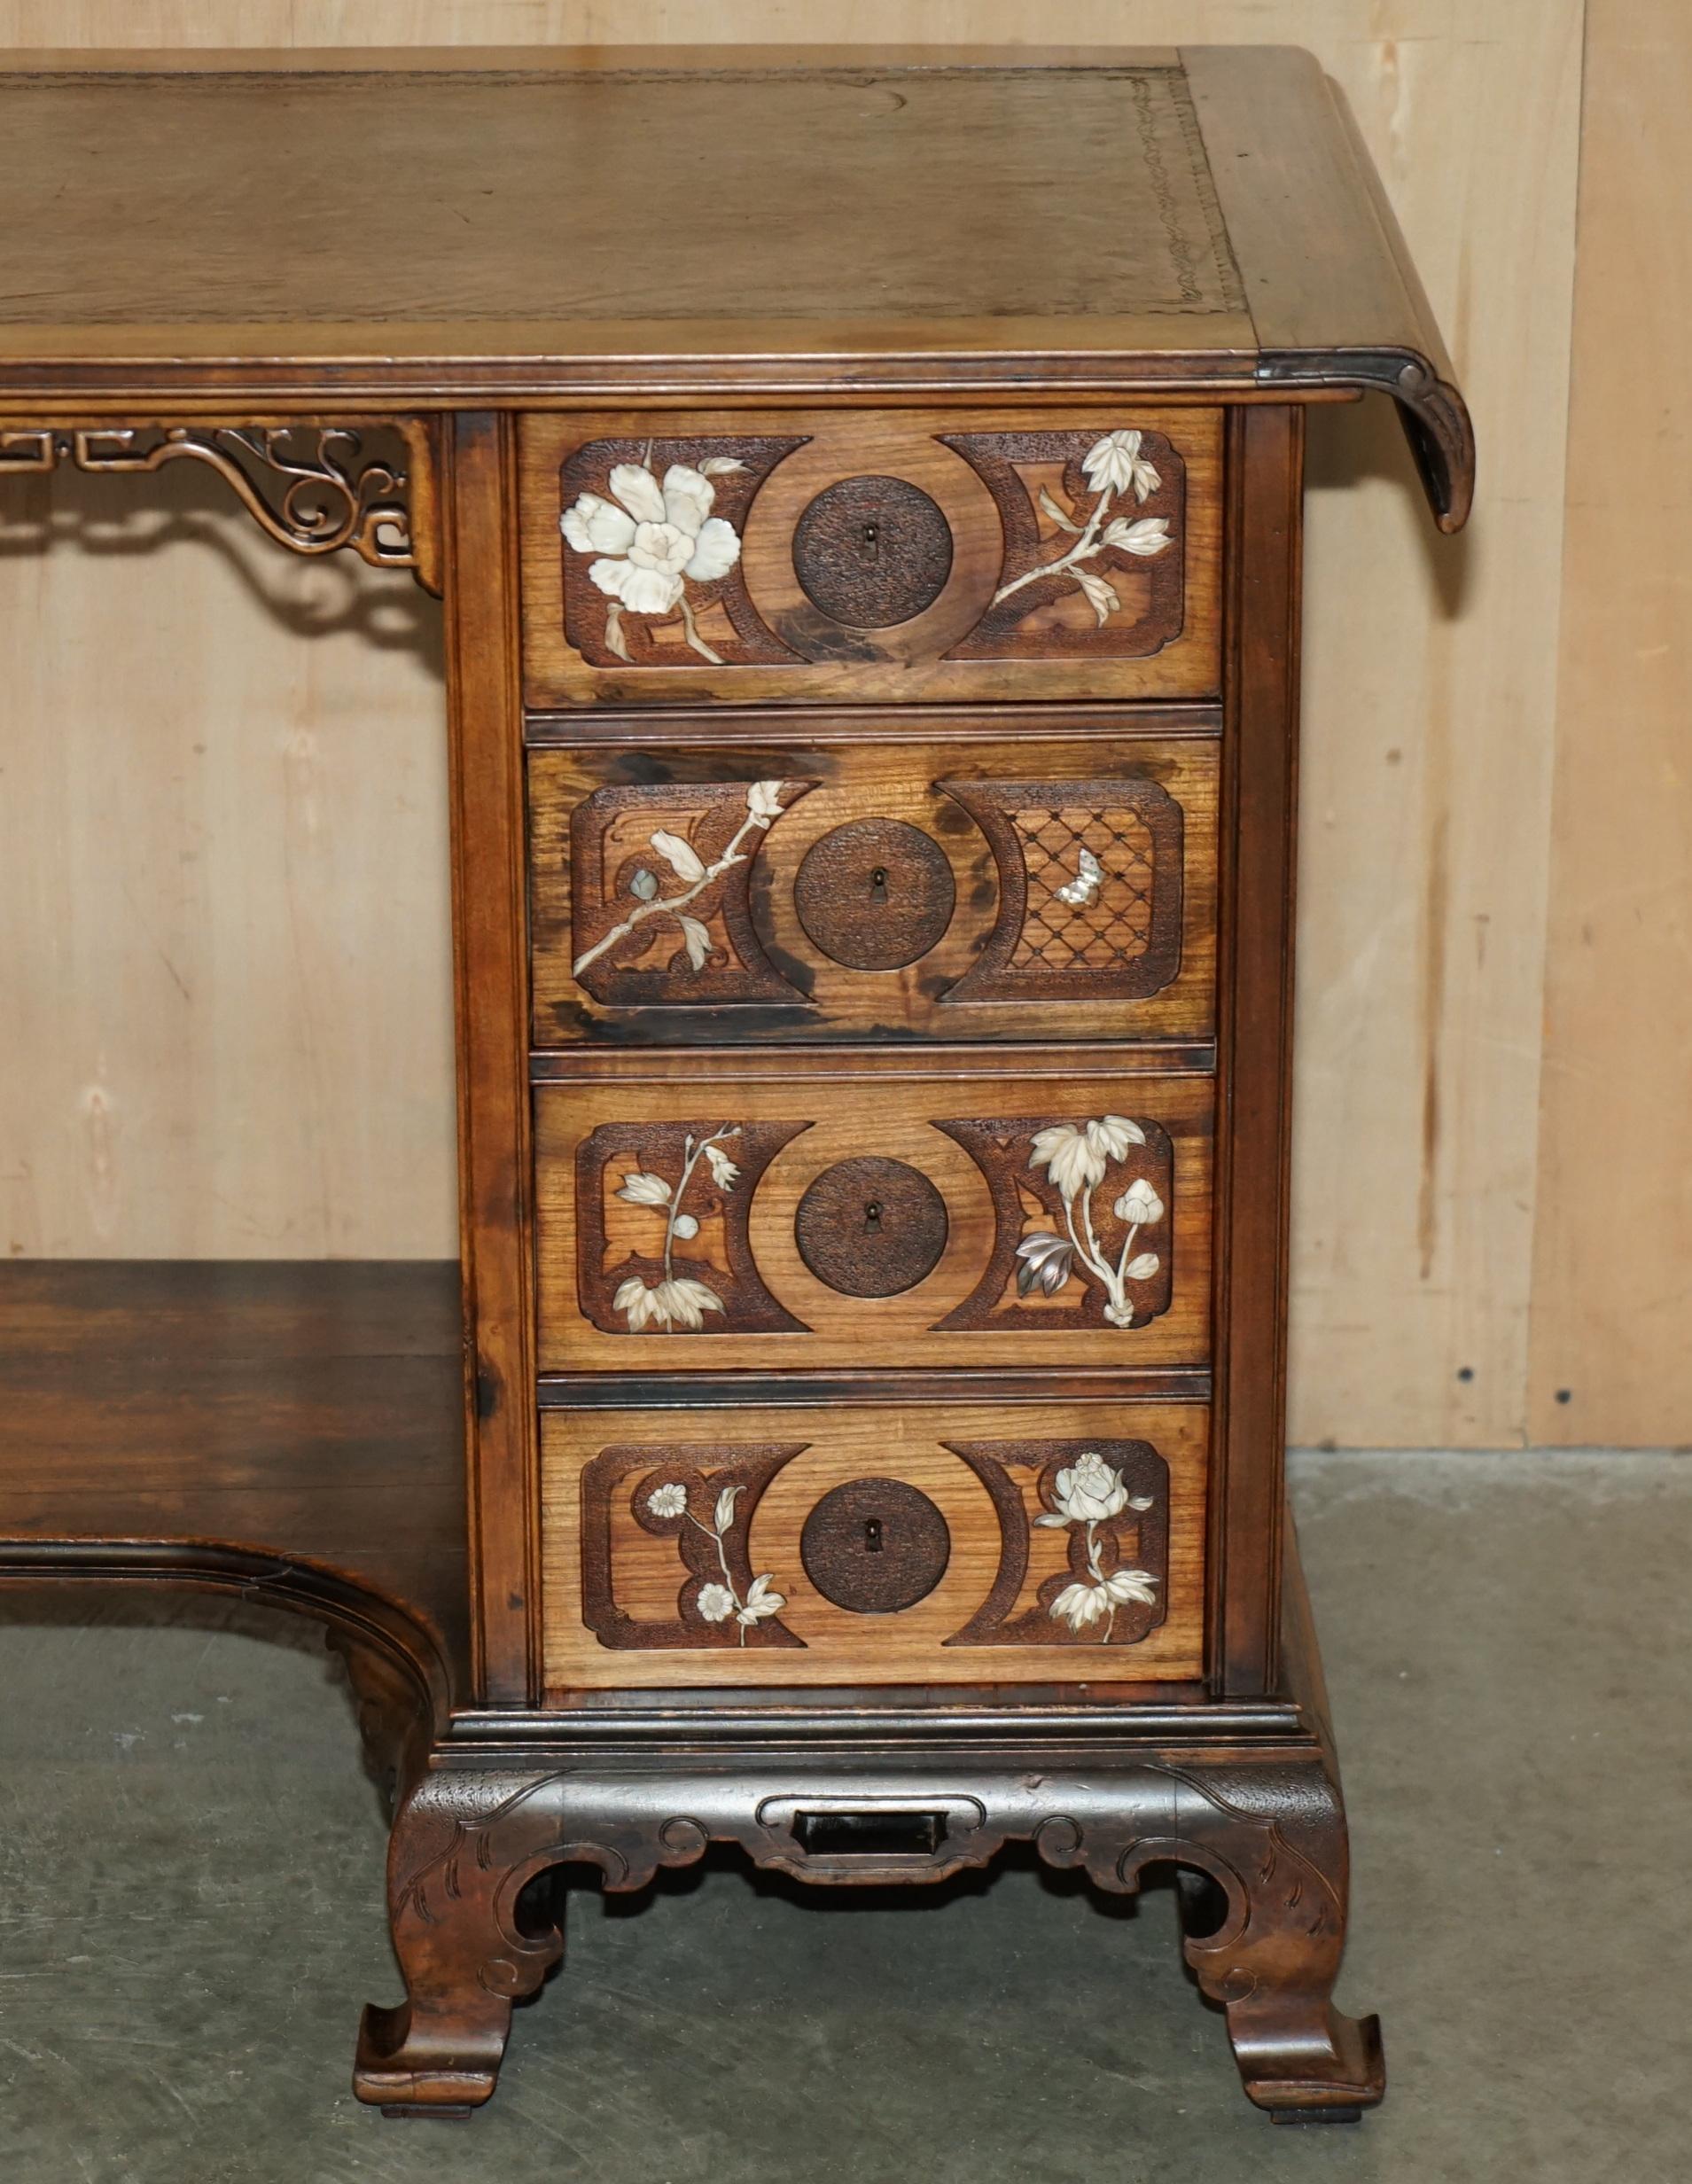 Hand-Crafted IMPORTANT ANTiQUE GABRIELD VIARDOT 1830-1906 ATTRIUBTED JAPONISME PEARL DESK For Sale